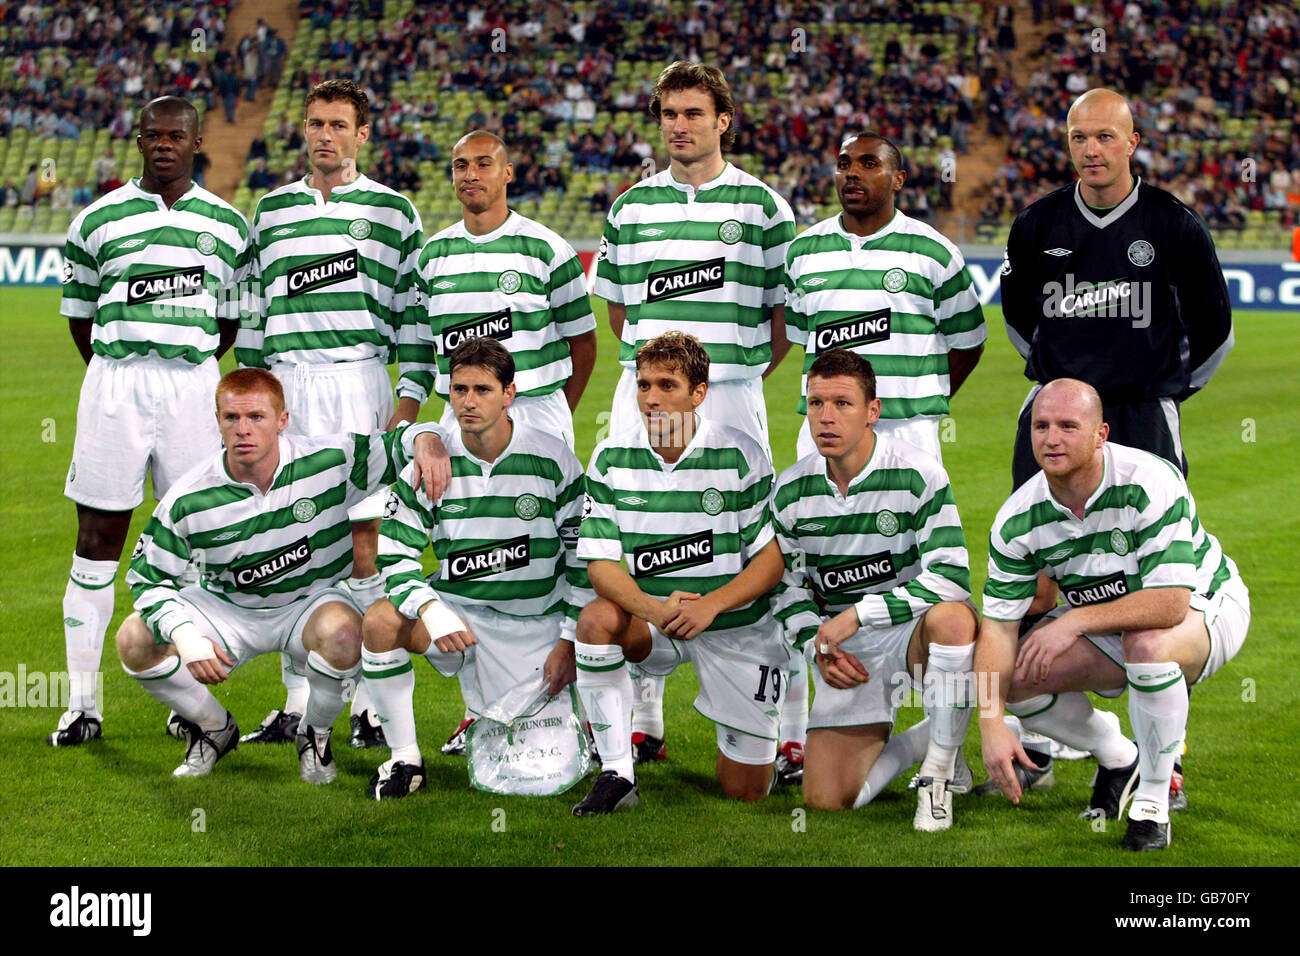 From the Archives, Celtic 4-3 Juventus